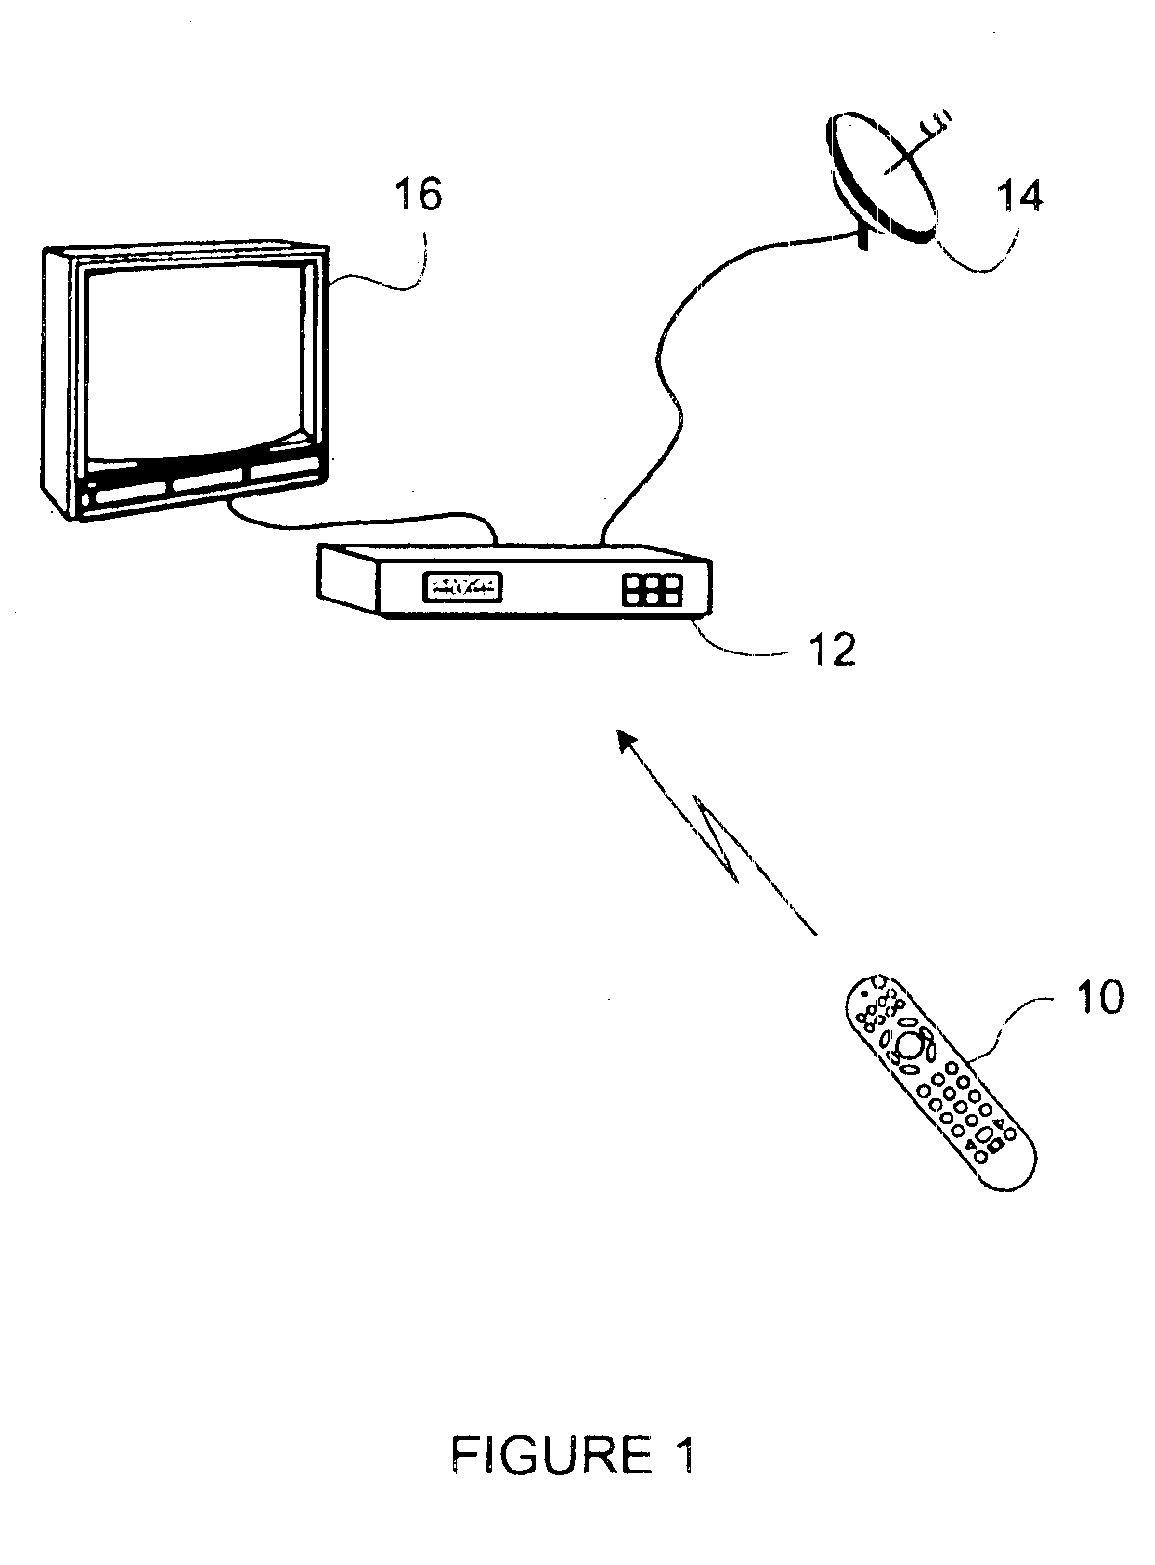 System and method for limiting access to data